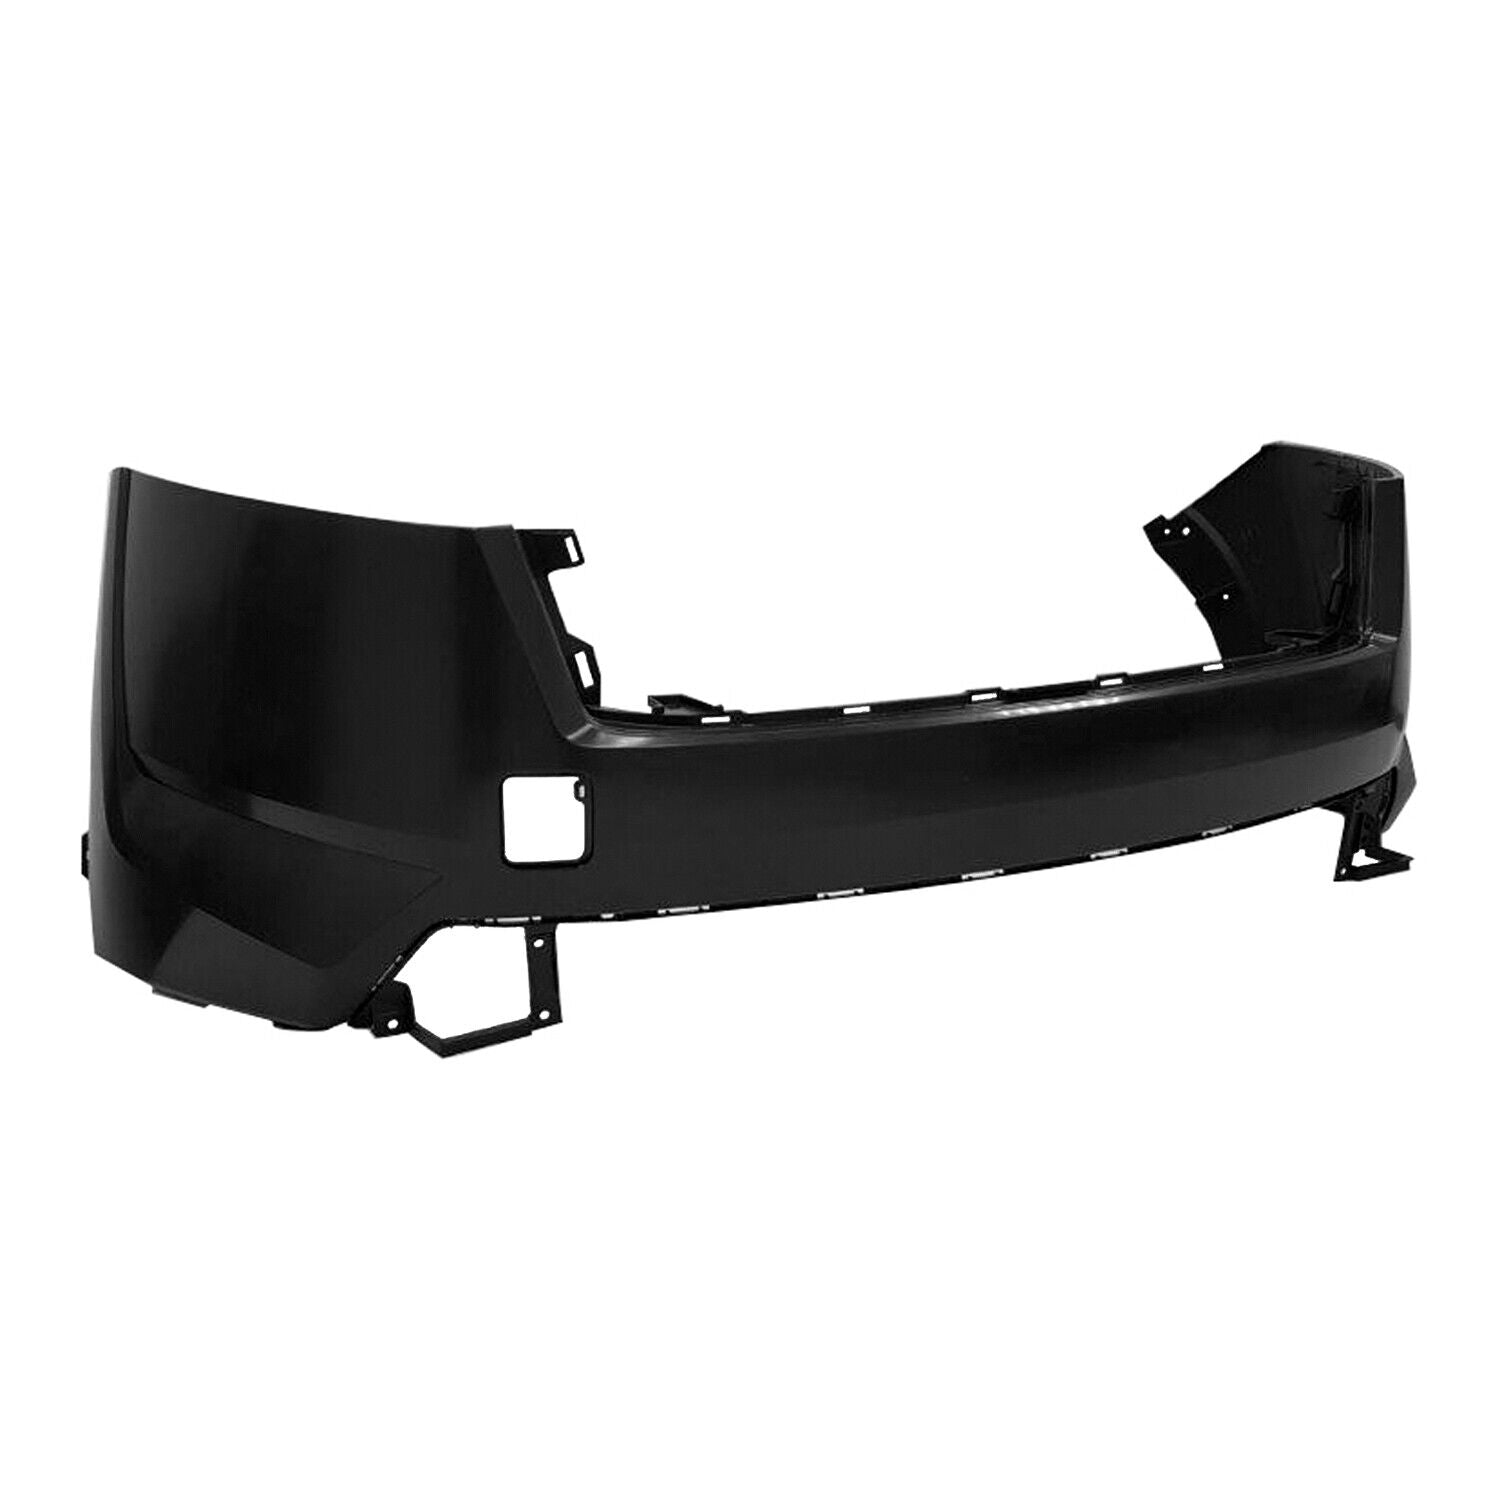 2022-2022 NISSAN PATHFINDER; Front Bumper Cover upper; w/o Sensor Painted to Match